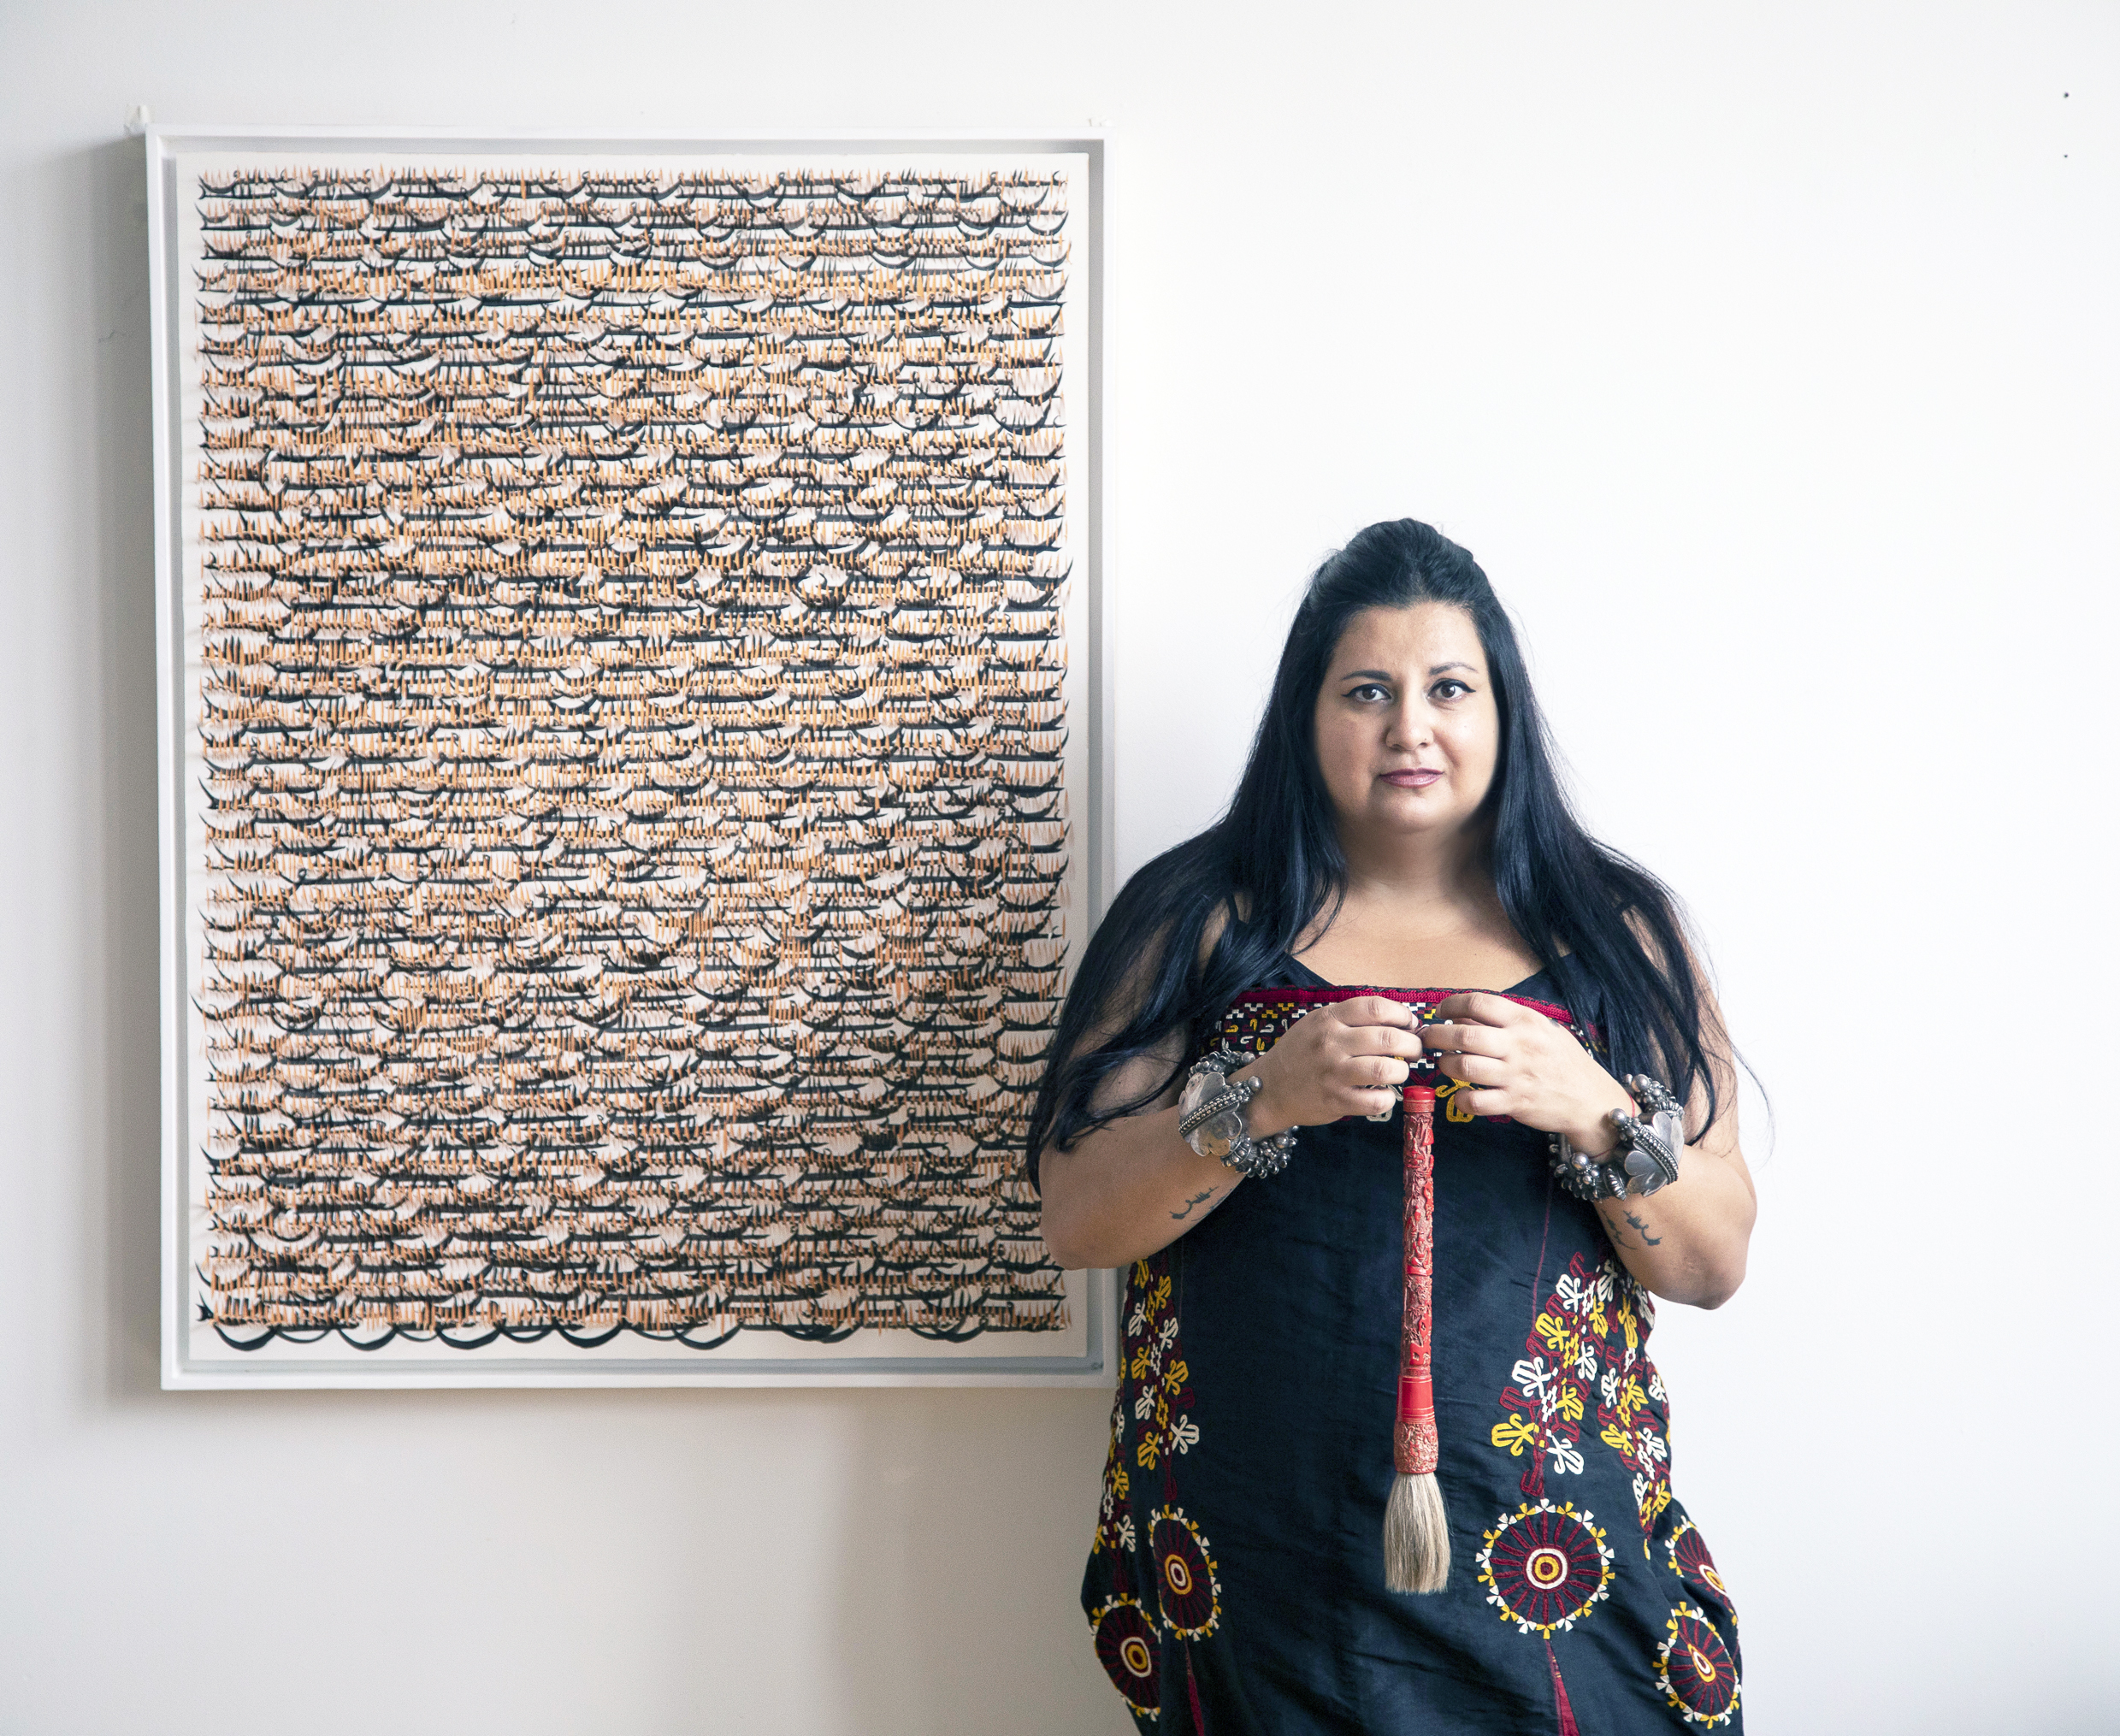 A woman with dark hair stands next to a piece of art